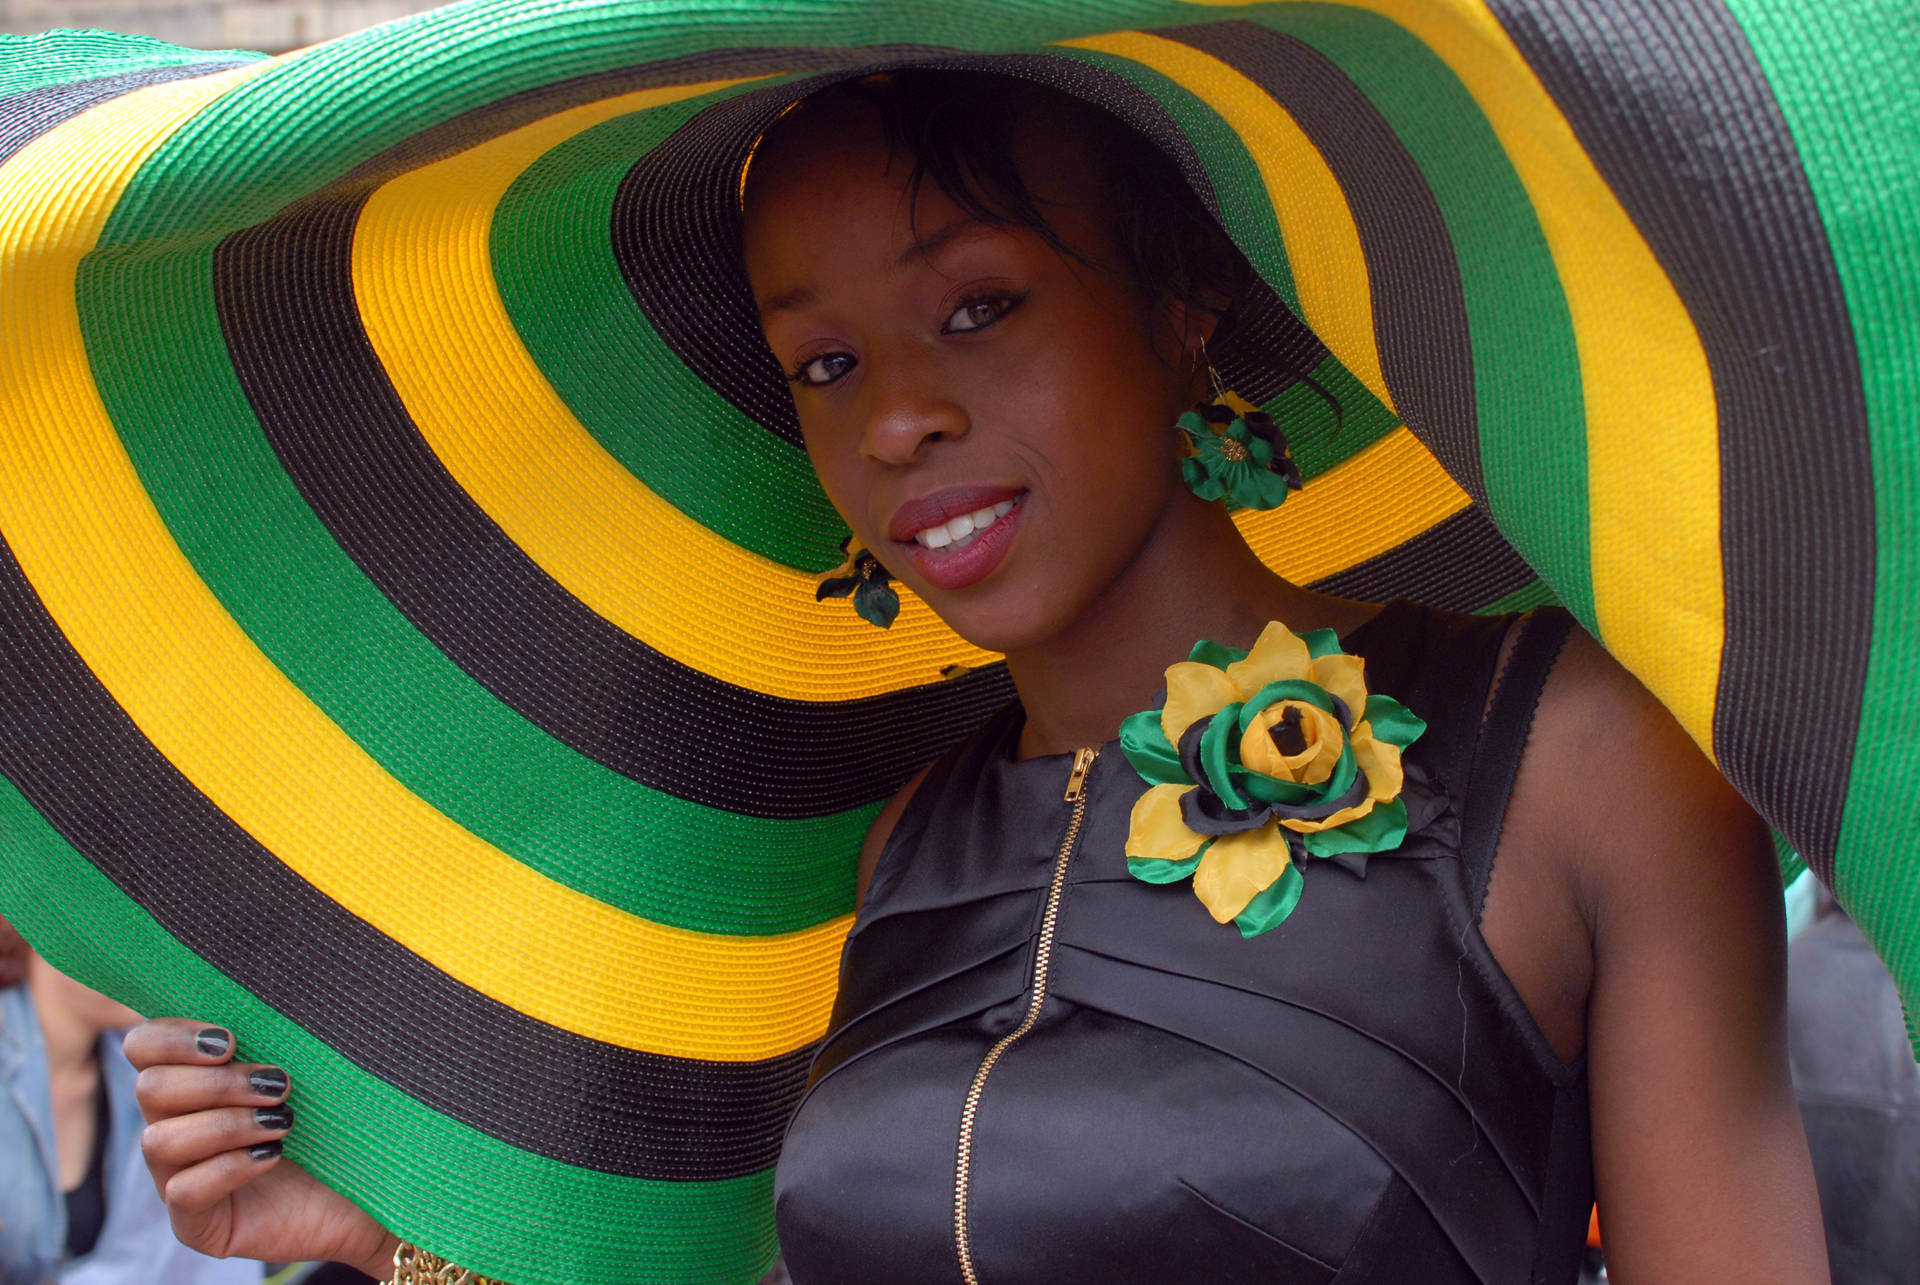 Beautiful Lady In Jamaica Background